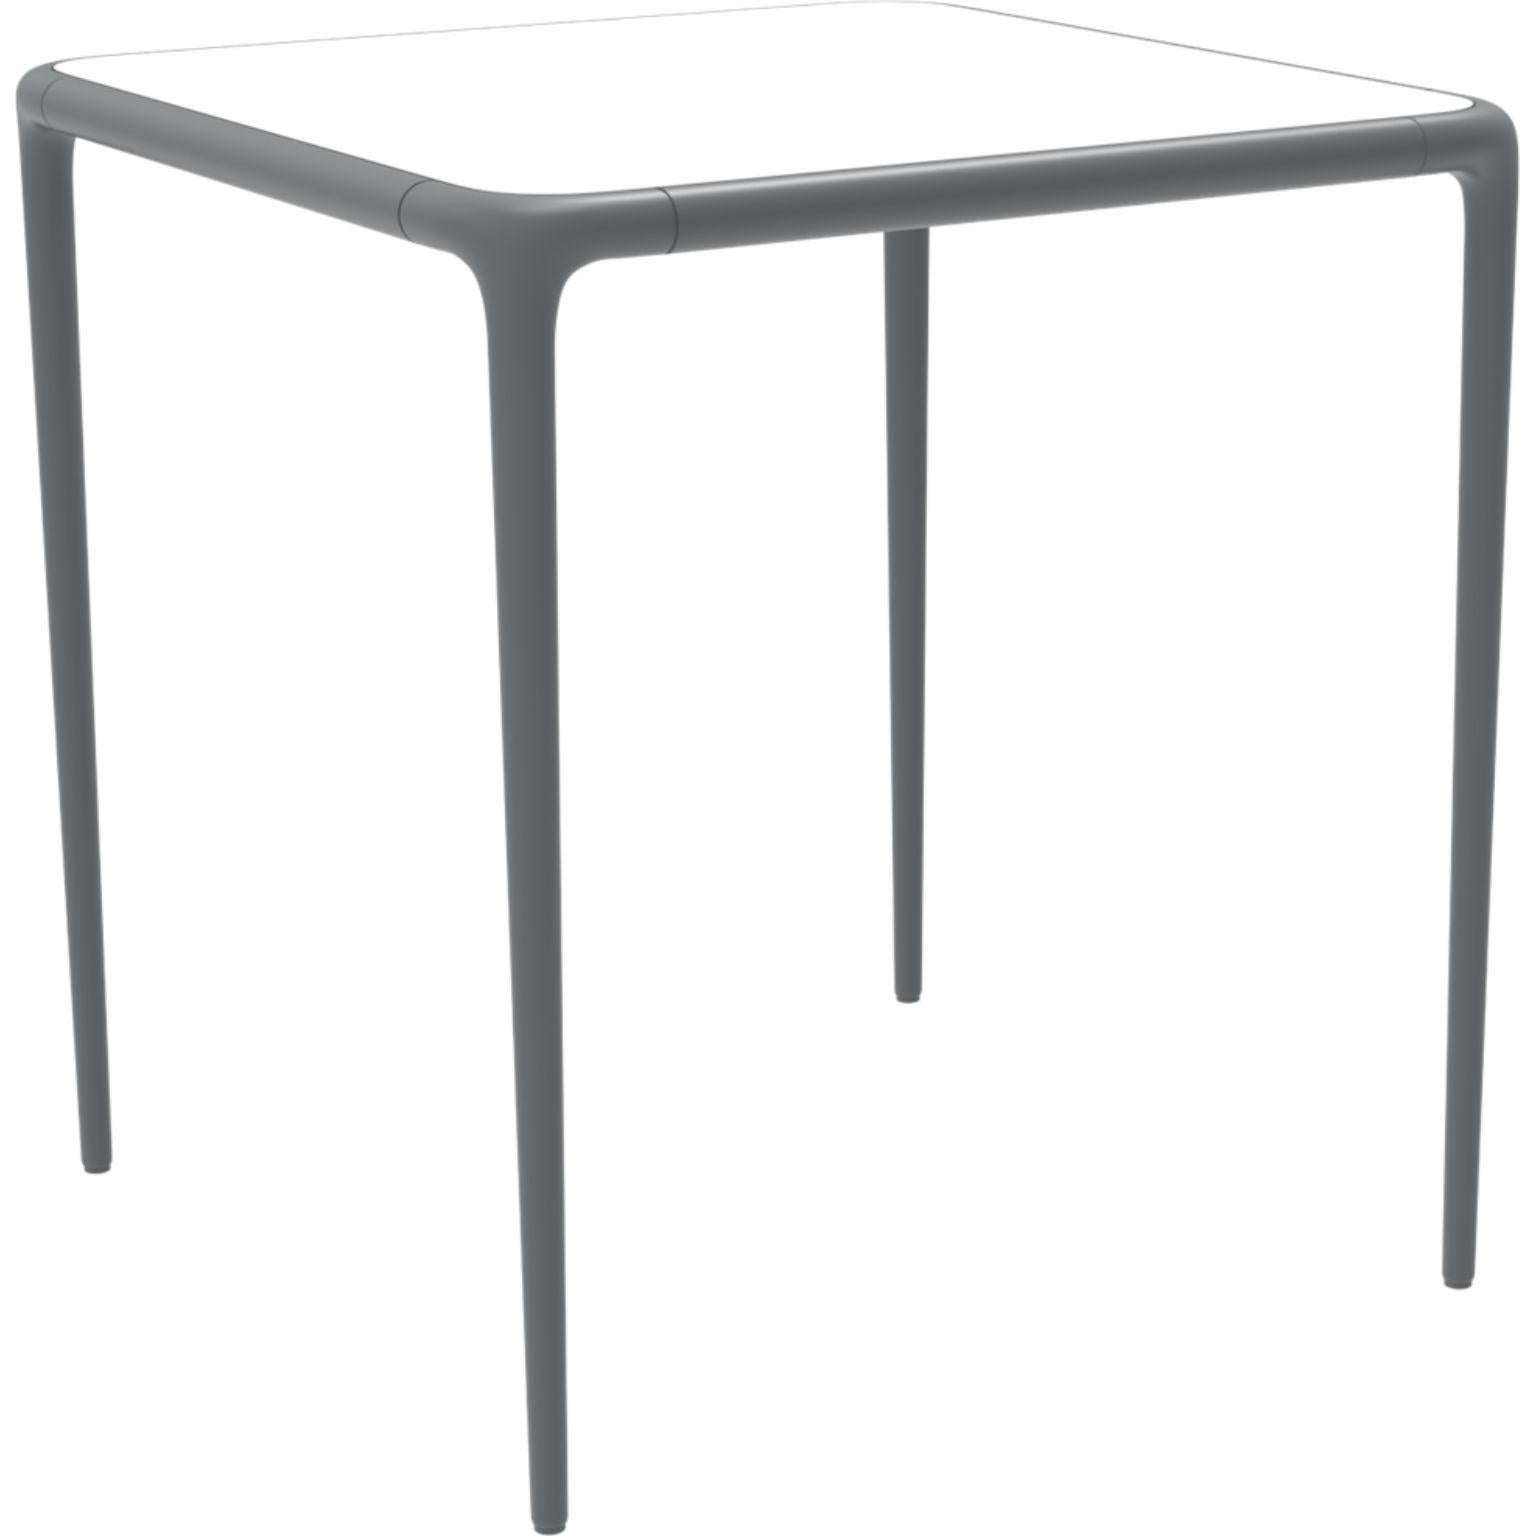 Xaloc grey glass top table 70 by MOWEE
Dimensions: D70 x W70 x H74 cm
Material: Aluminum, tinted tempered glass top.
Also available in different aluminum colors and finishes (HPL Black Edge or Neolith).

Xaloc synthesizes the lines of interior